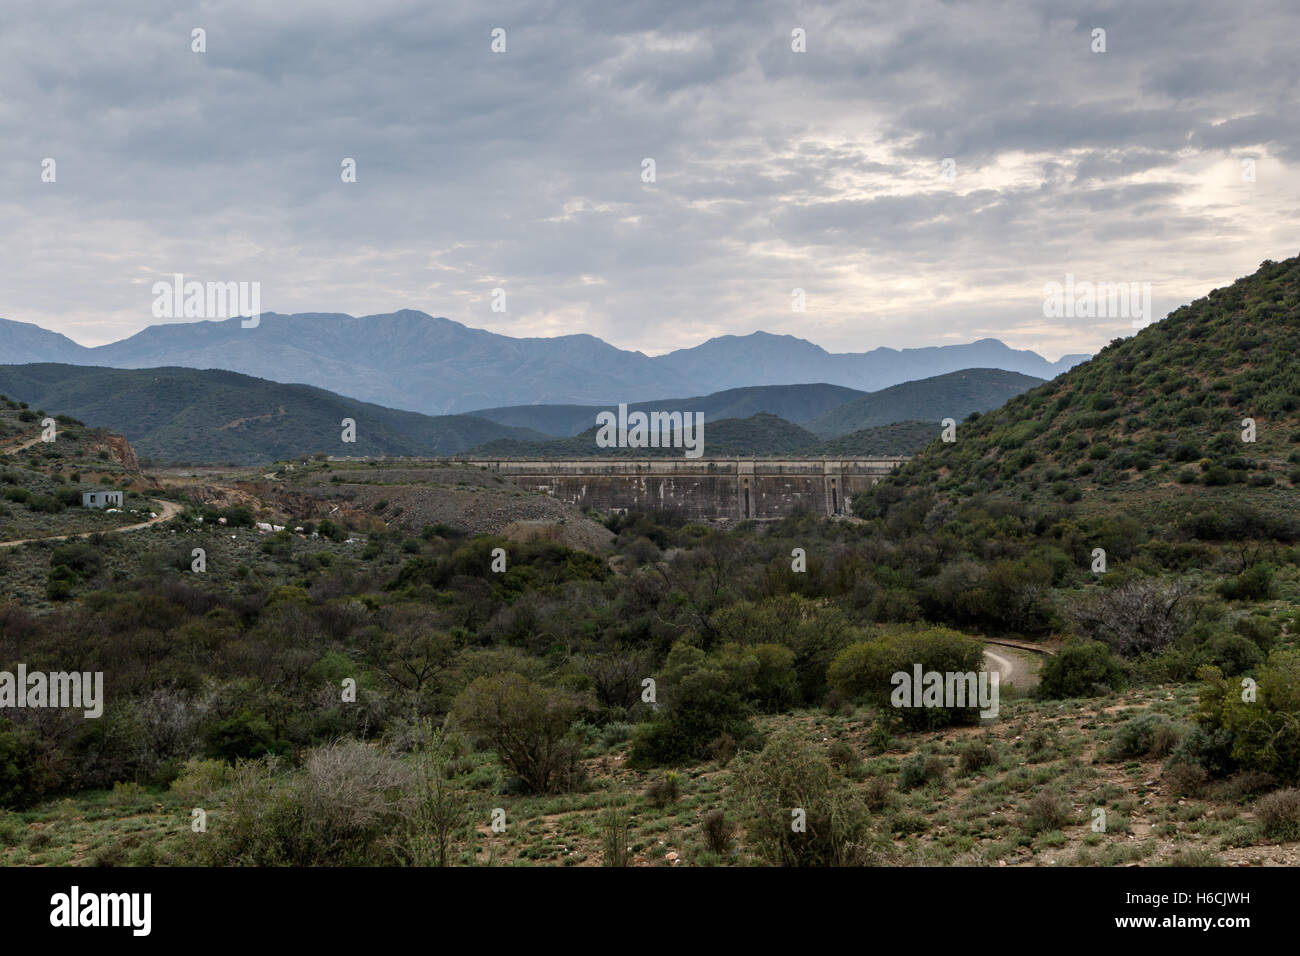 Dam wall at Calitzdorp, cloudy with mountains in the background. Stock Photo